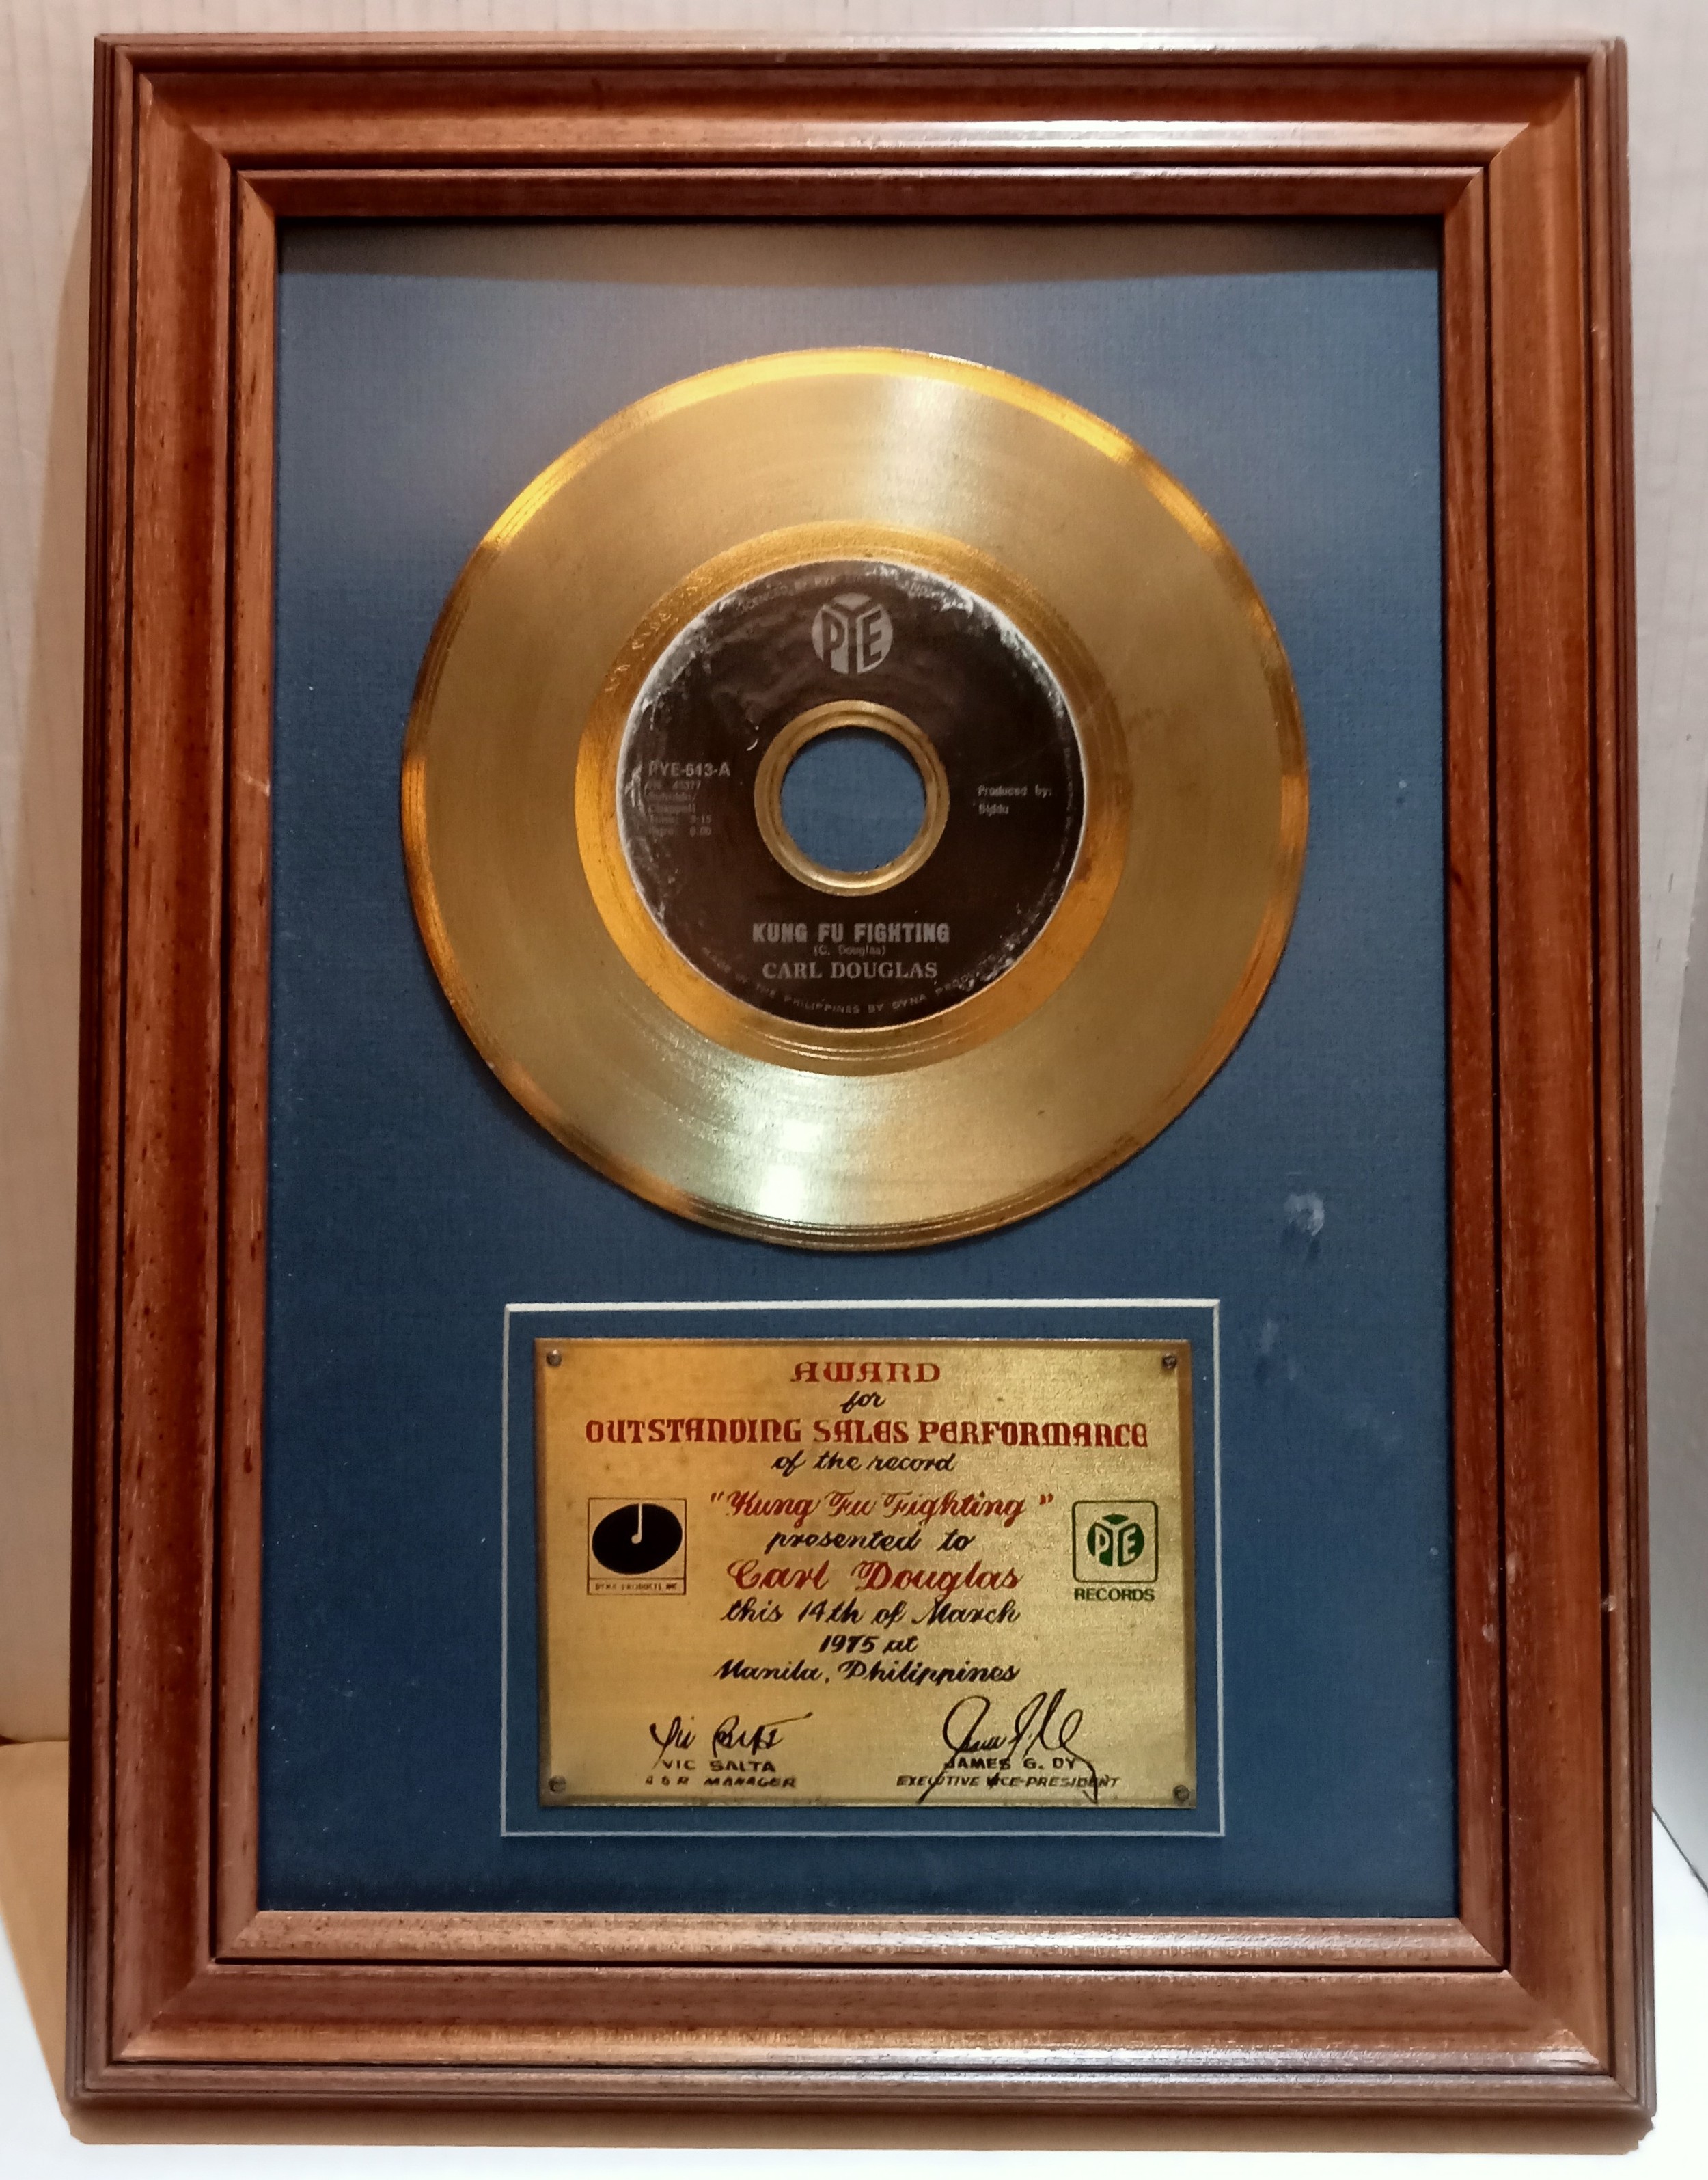 Carl Douglas Kung Fu Fighting two presentation Gold Disc’s from PYE & Phonogram limited